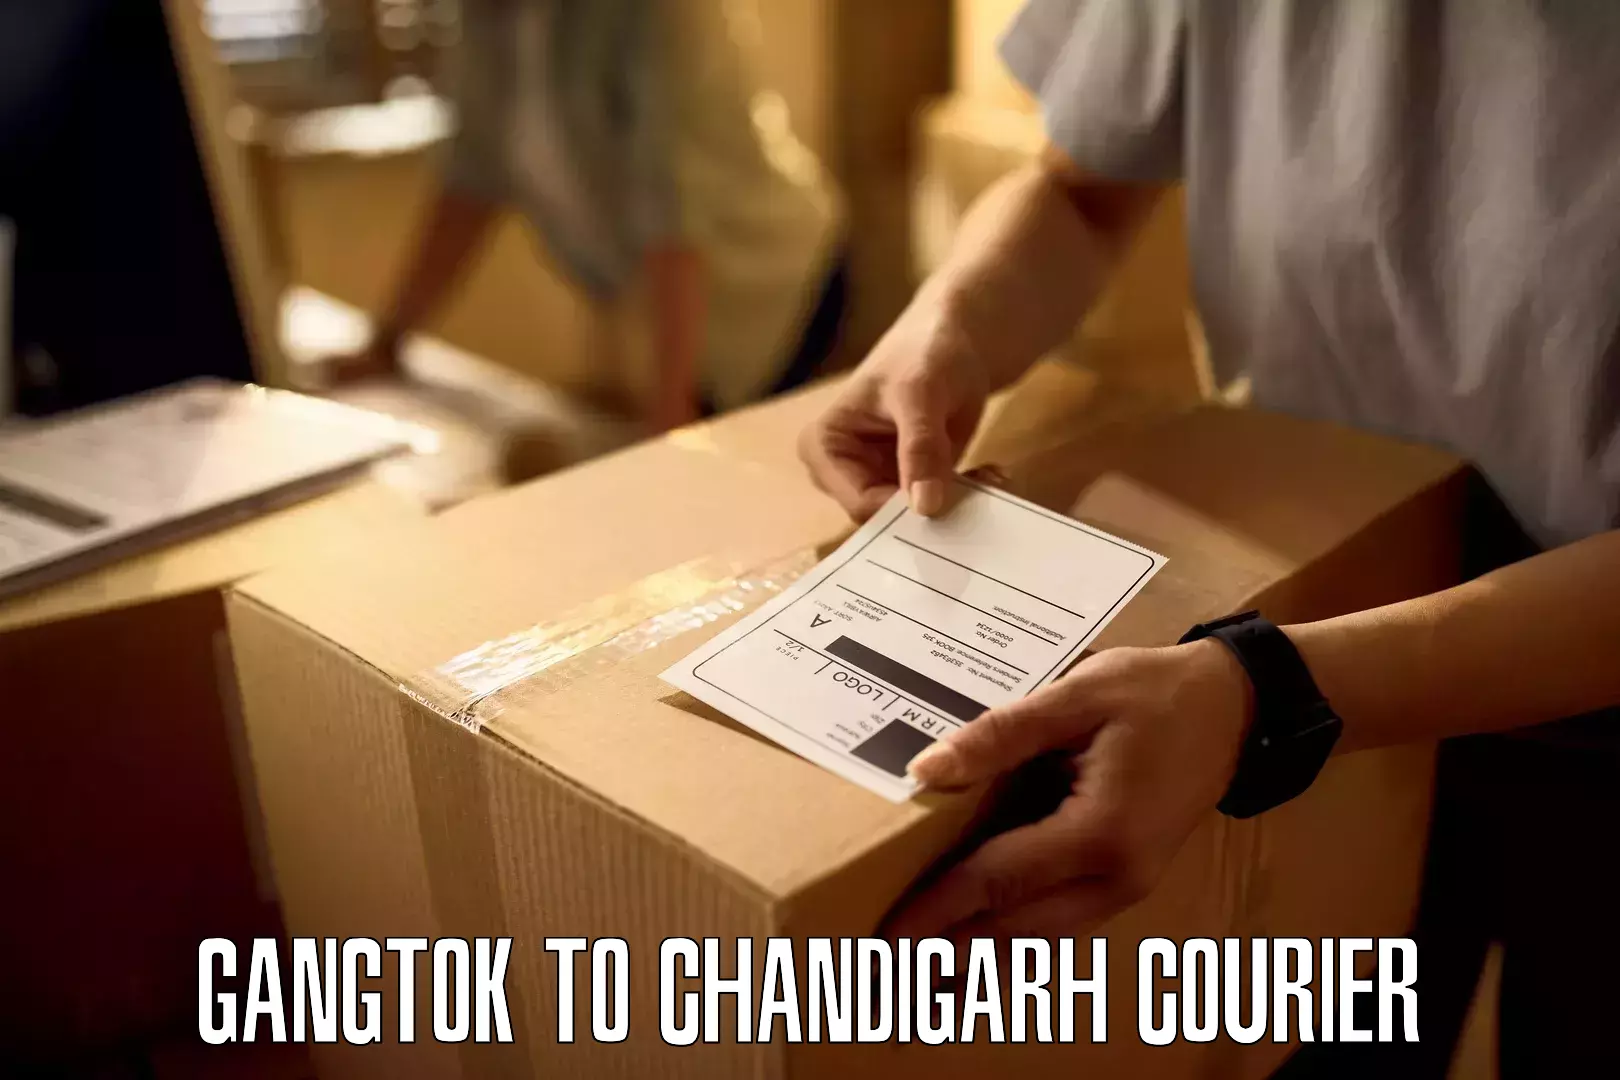 User-friendly delivery service Gangtok to Chandigarh